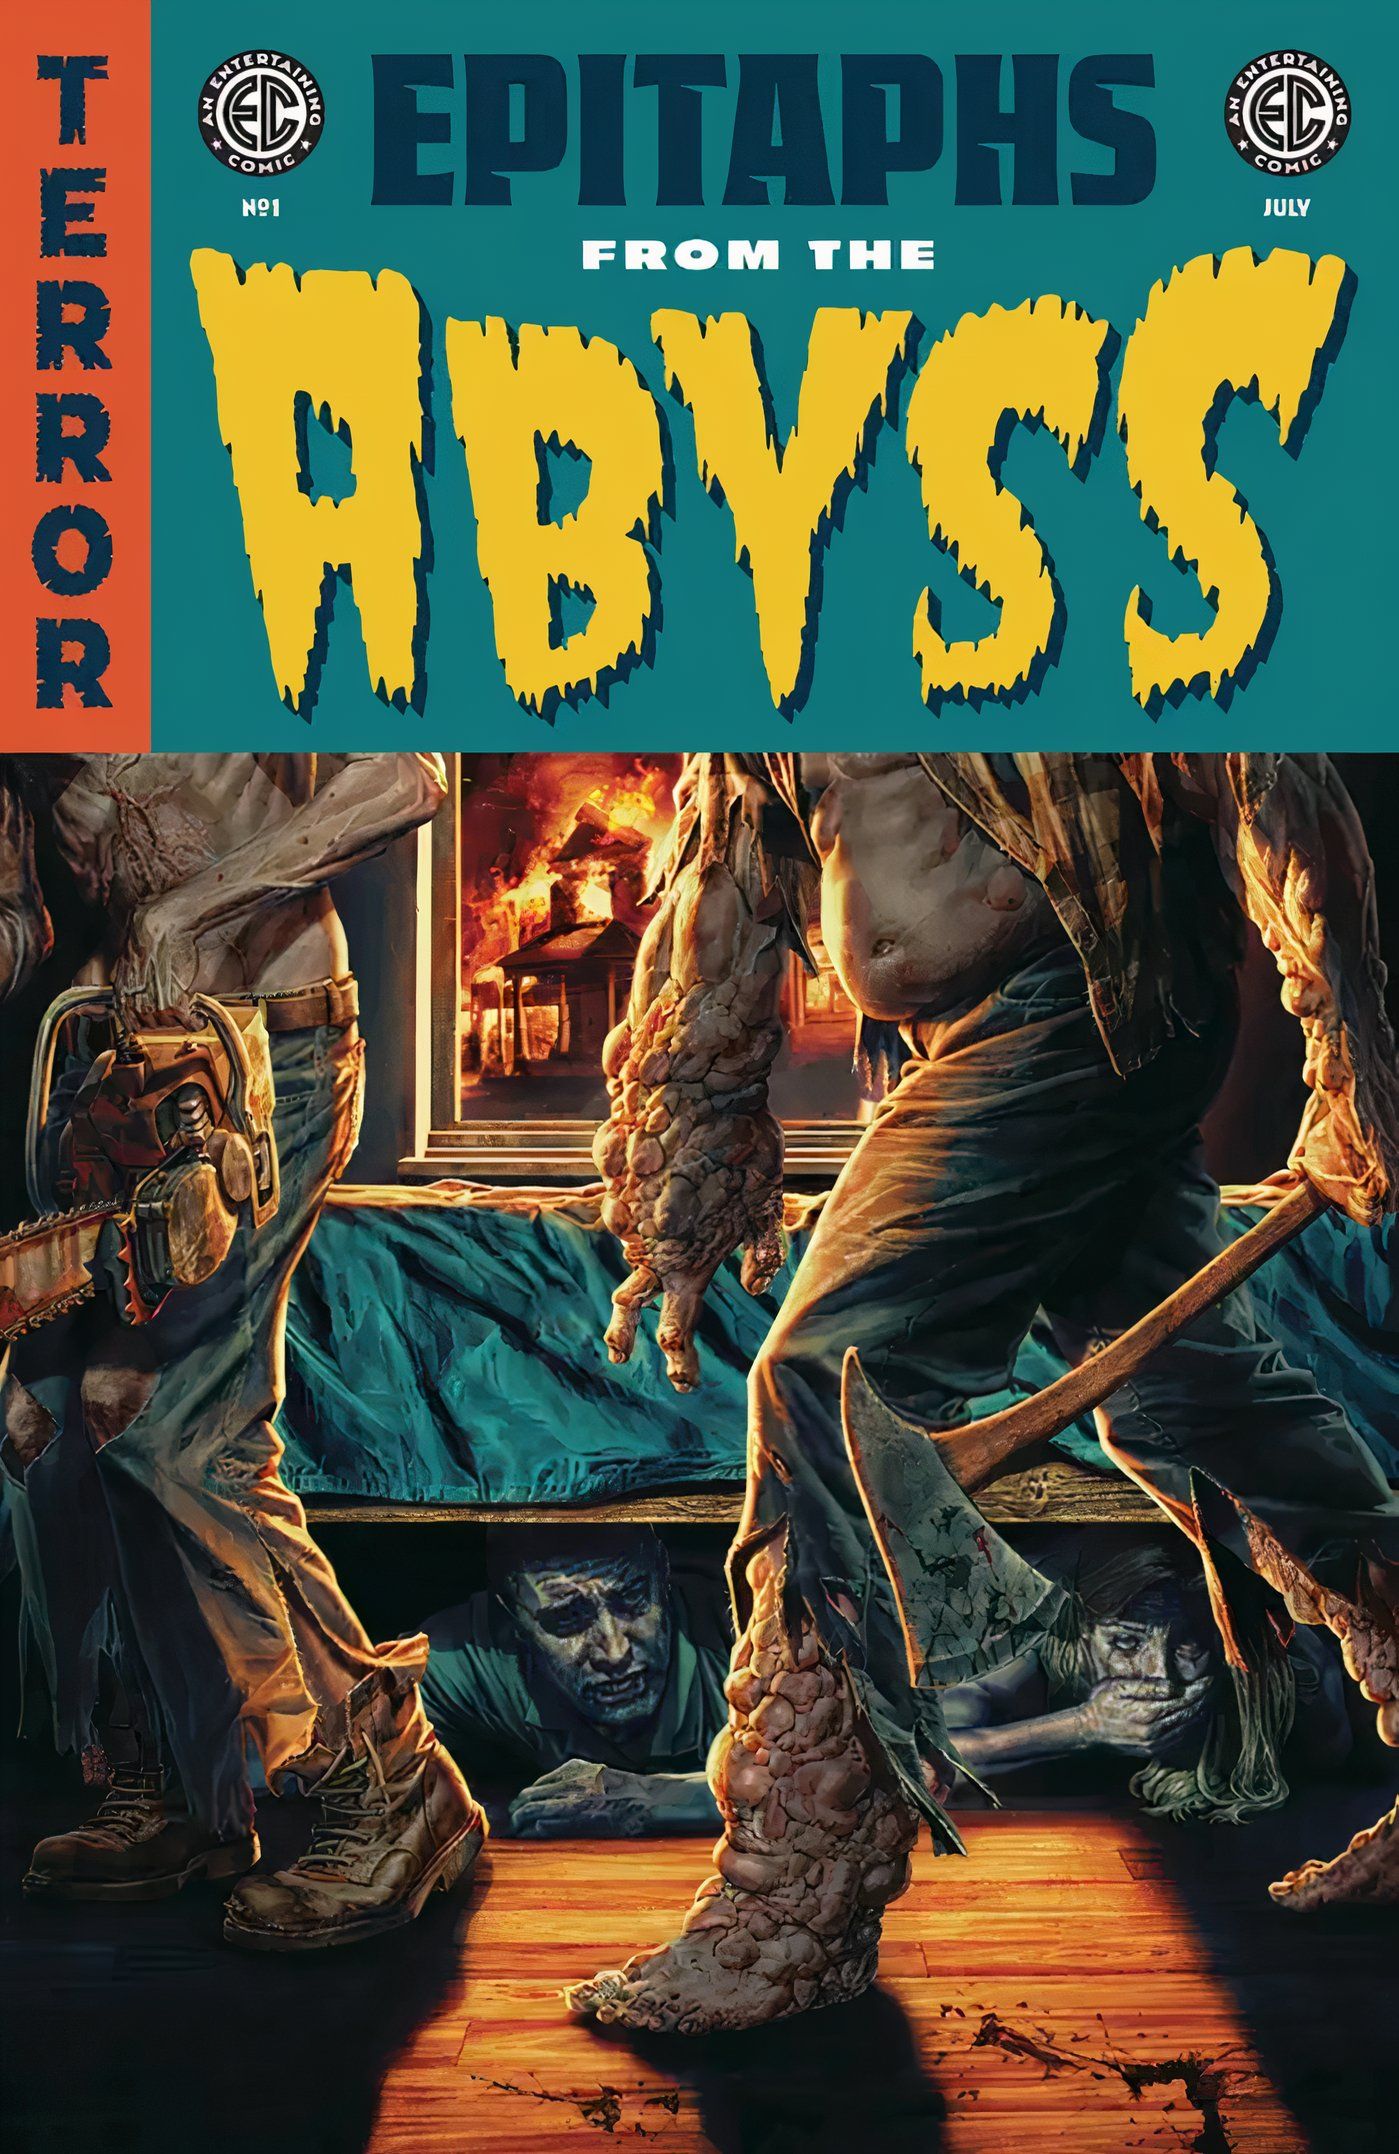 Epitaphs From The Abyss 1 cover from Oni Press (EC Comics) featuring a man hiding under the bed as monsters search for him